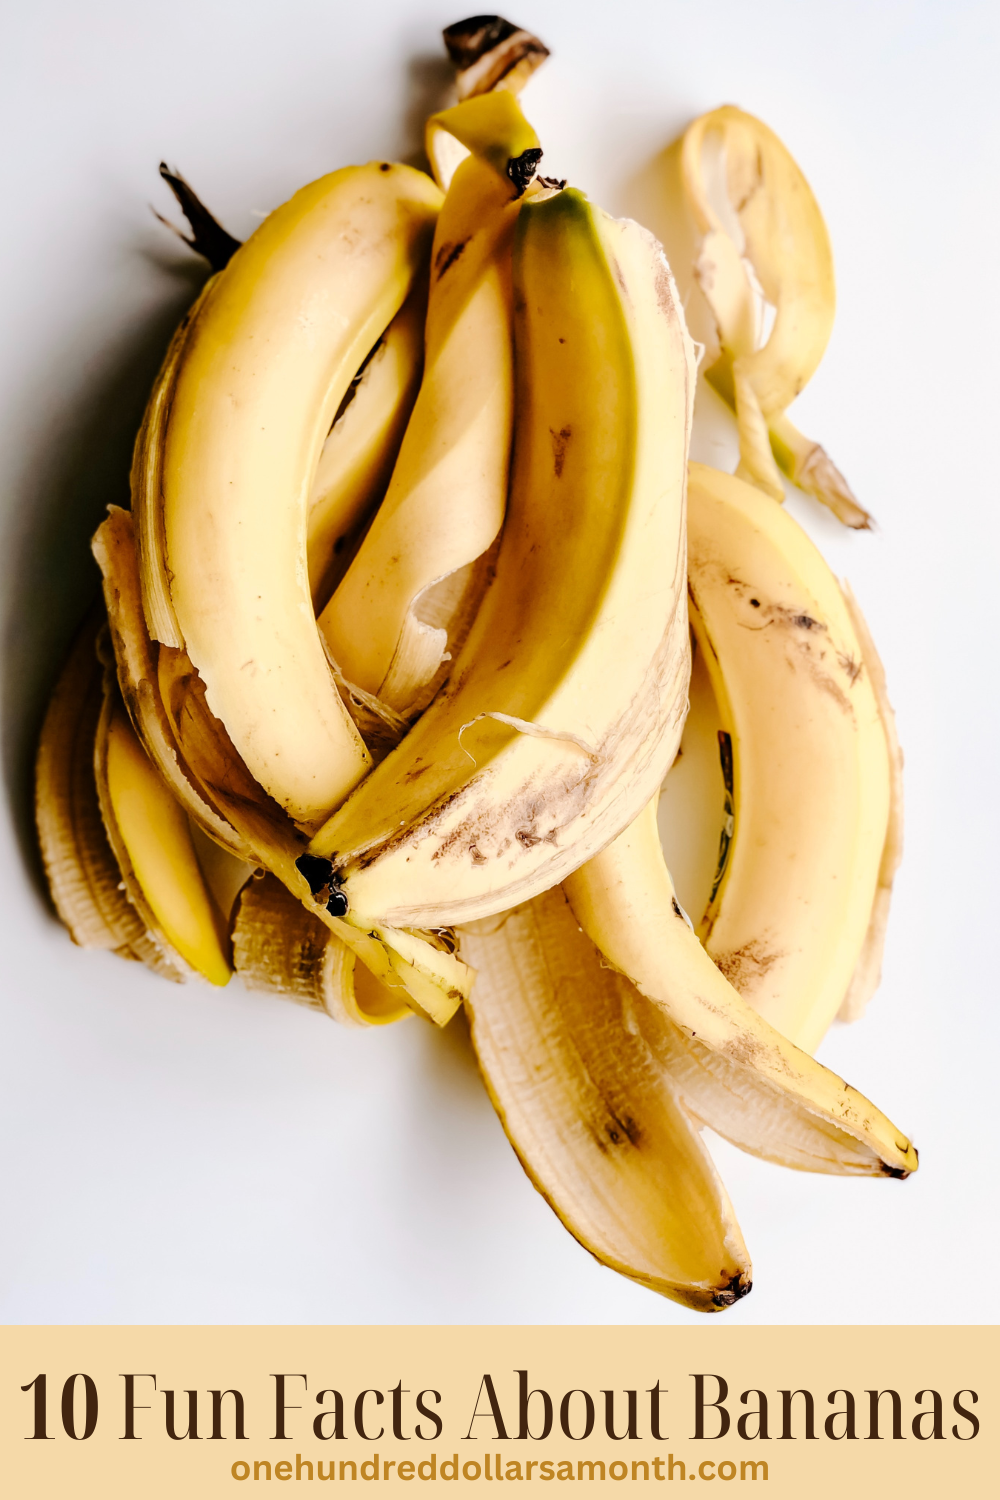 10 Fun Facts About Bananas